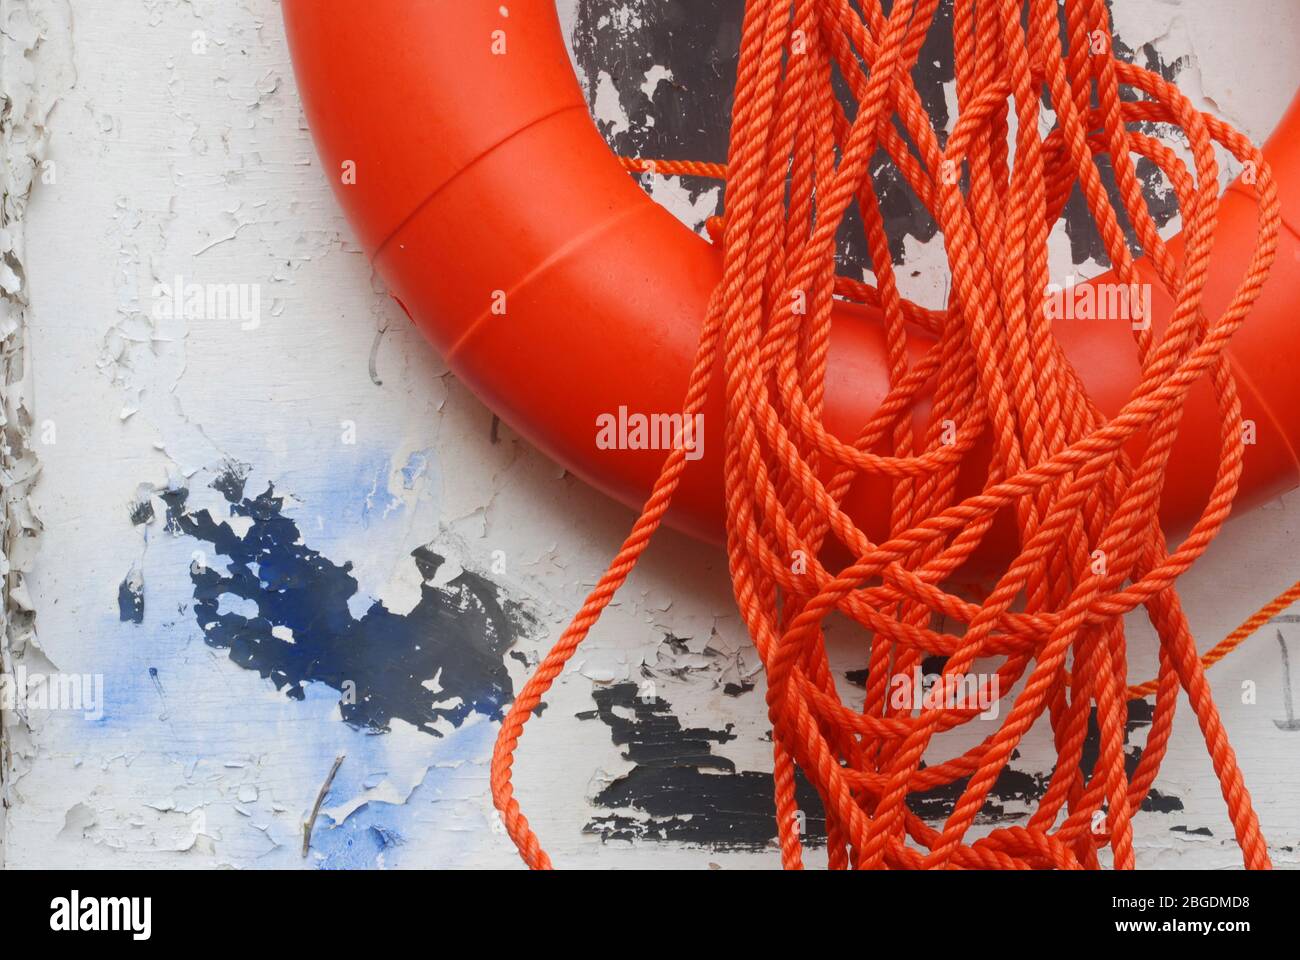 Close image of lower half of bright orange life belt with orange cord looped and attached to wooden board which has flaking white paint Stock Photo